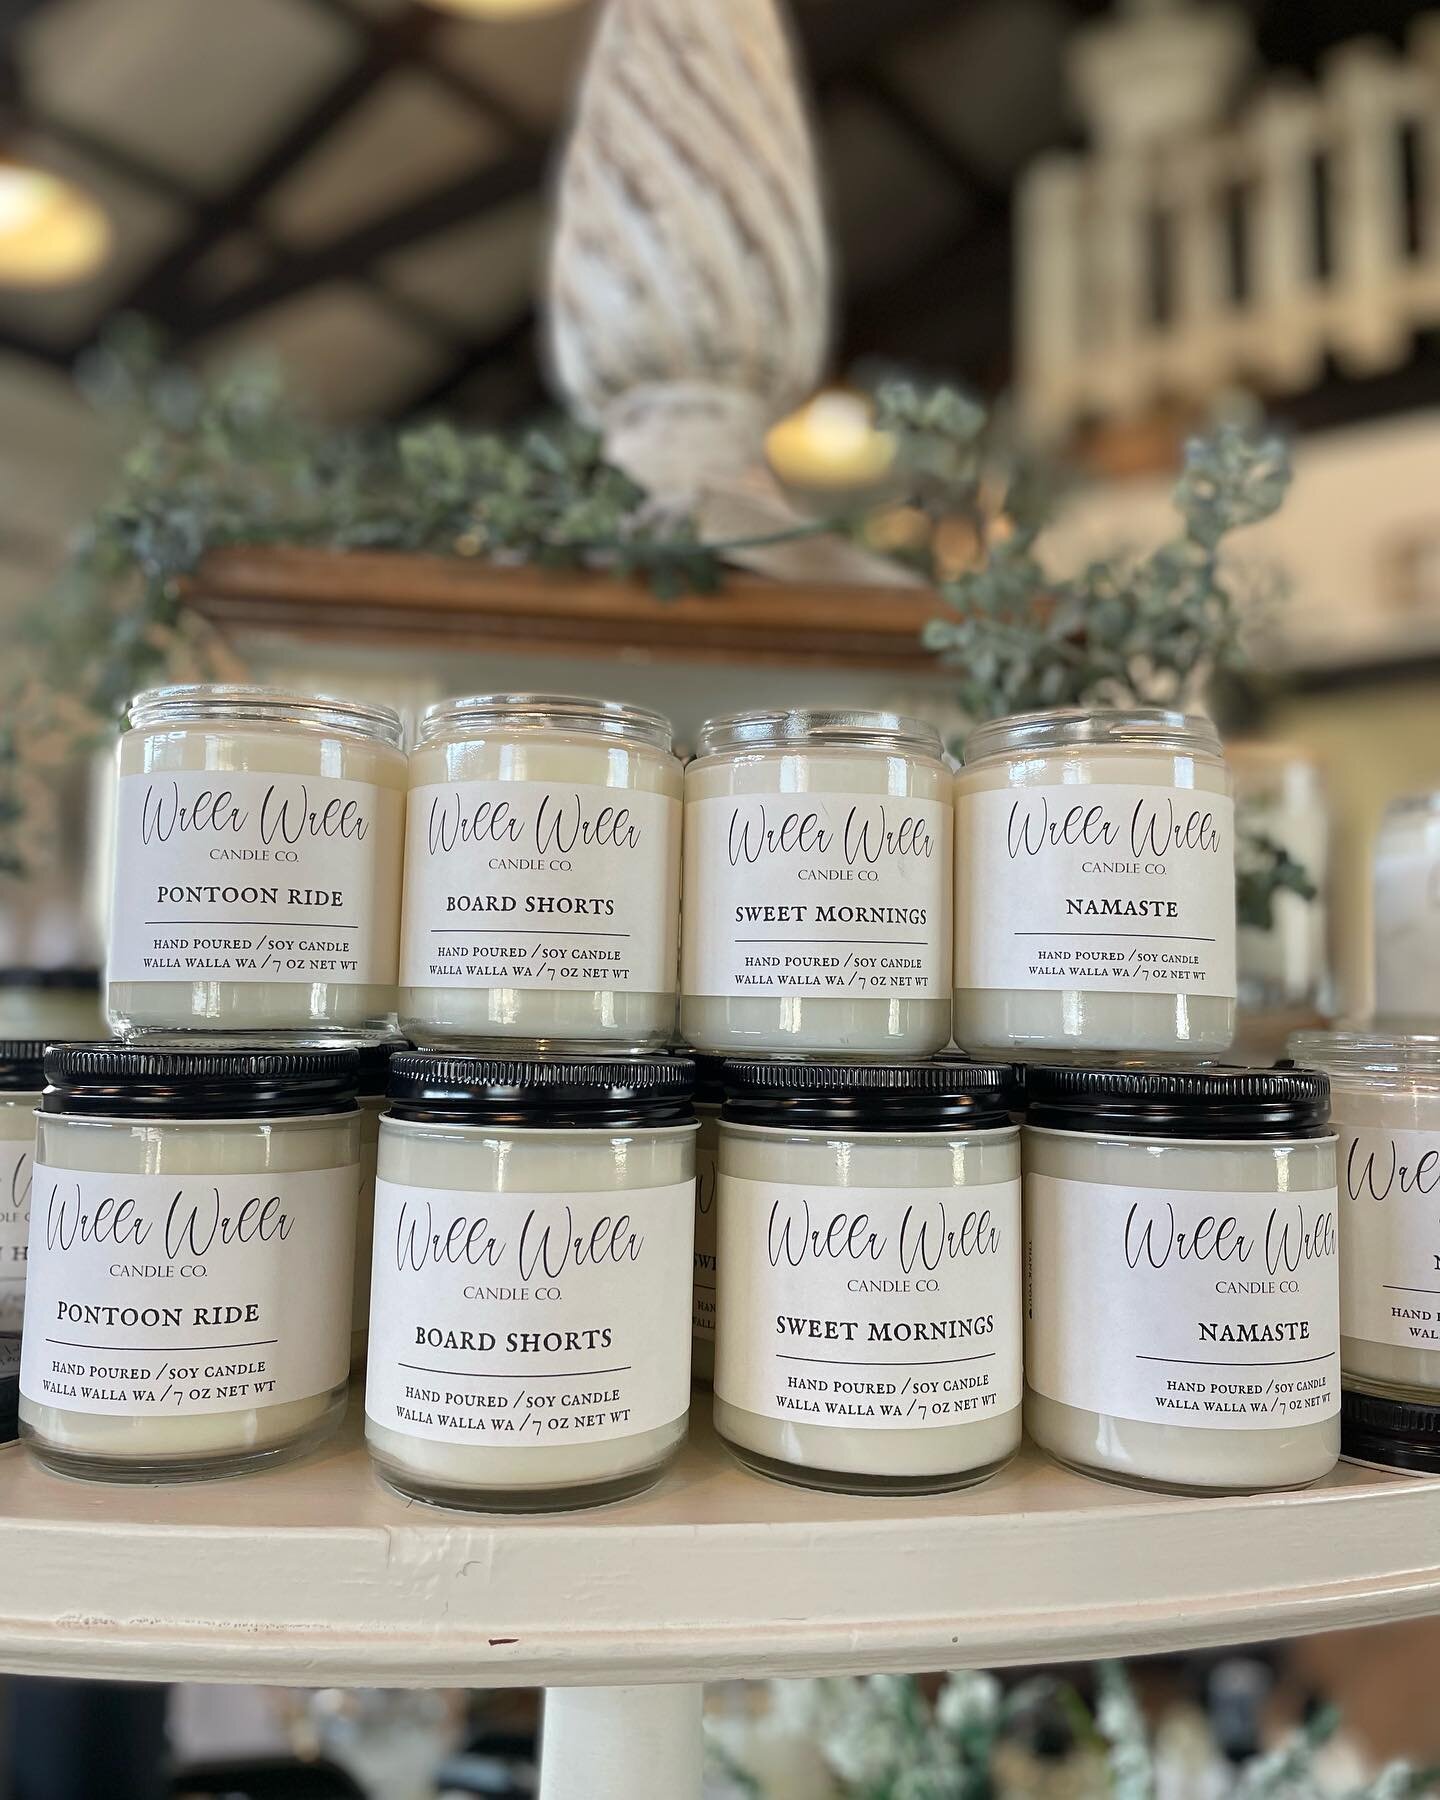 So happy to feature&hellip;@wallawallacandleco.
Come see us today or tomorrow 11 AM to 4 PM!